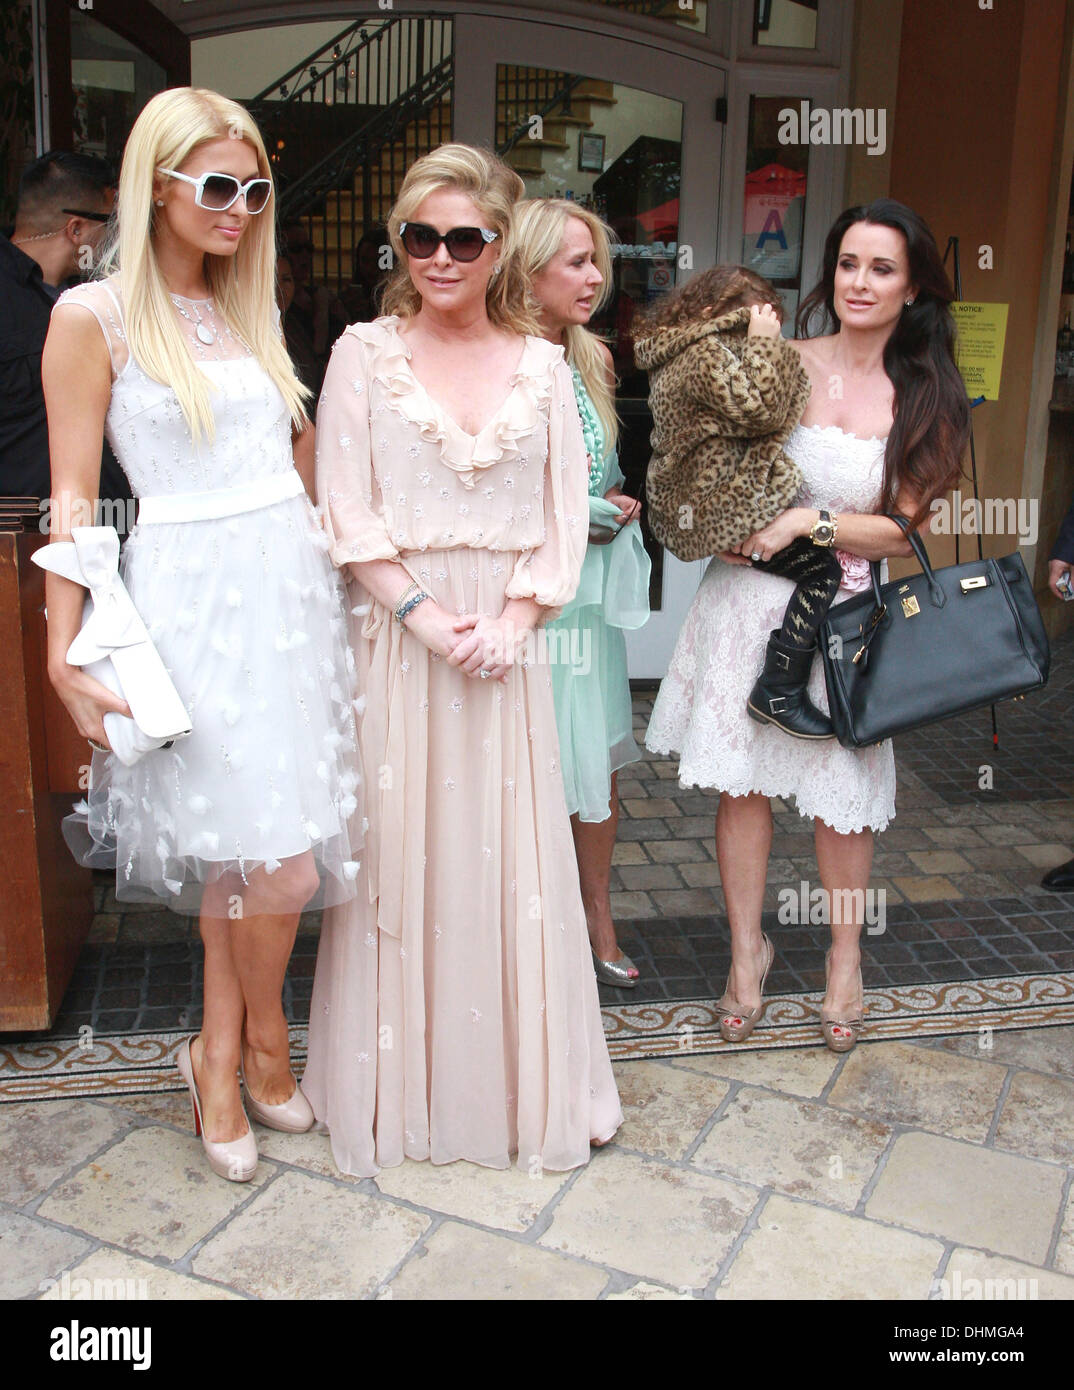 Paris Hilton, Kathy Hilton, Kim Richards and Kylie Richards  at The Grove to launch Kathy Hiltons new fashion line 'The Kathy Hilton collection' at Nordstroms.  Los Angeles, California - 02.05.12 Stock Photo